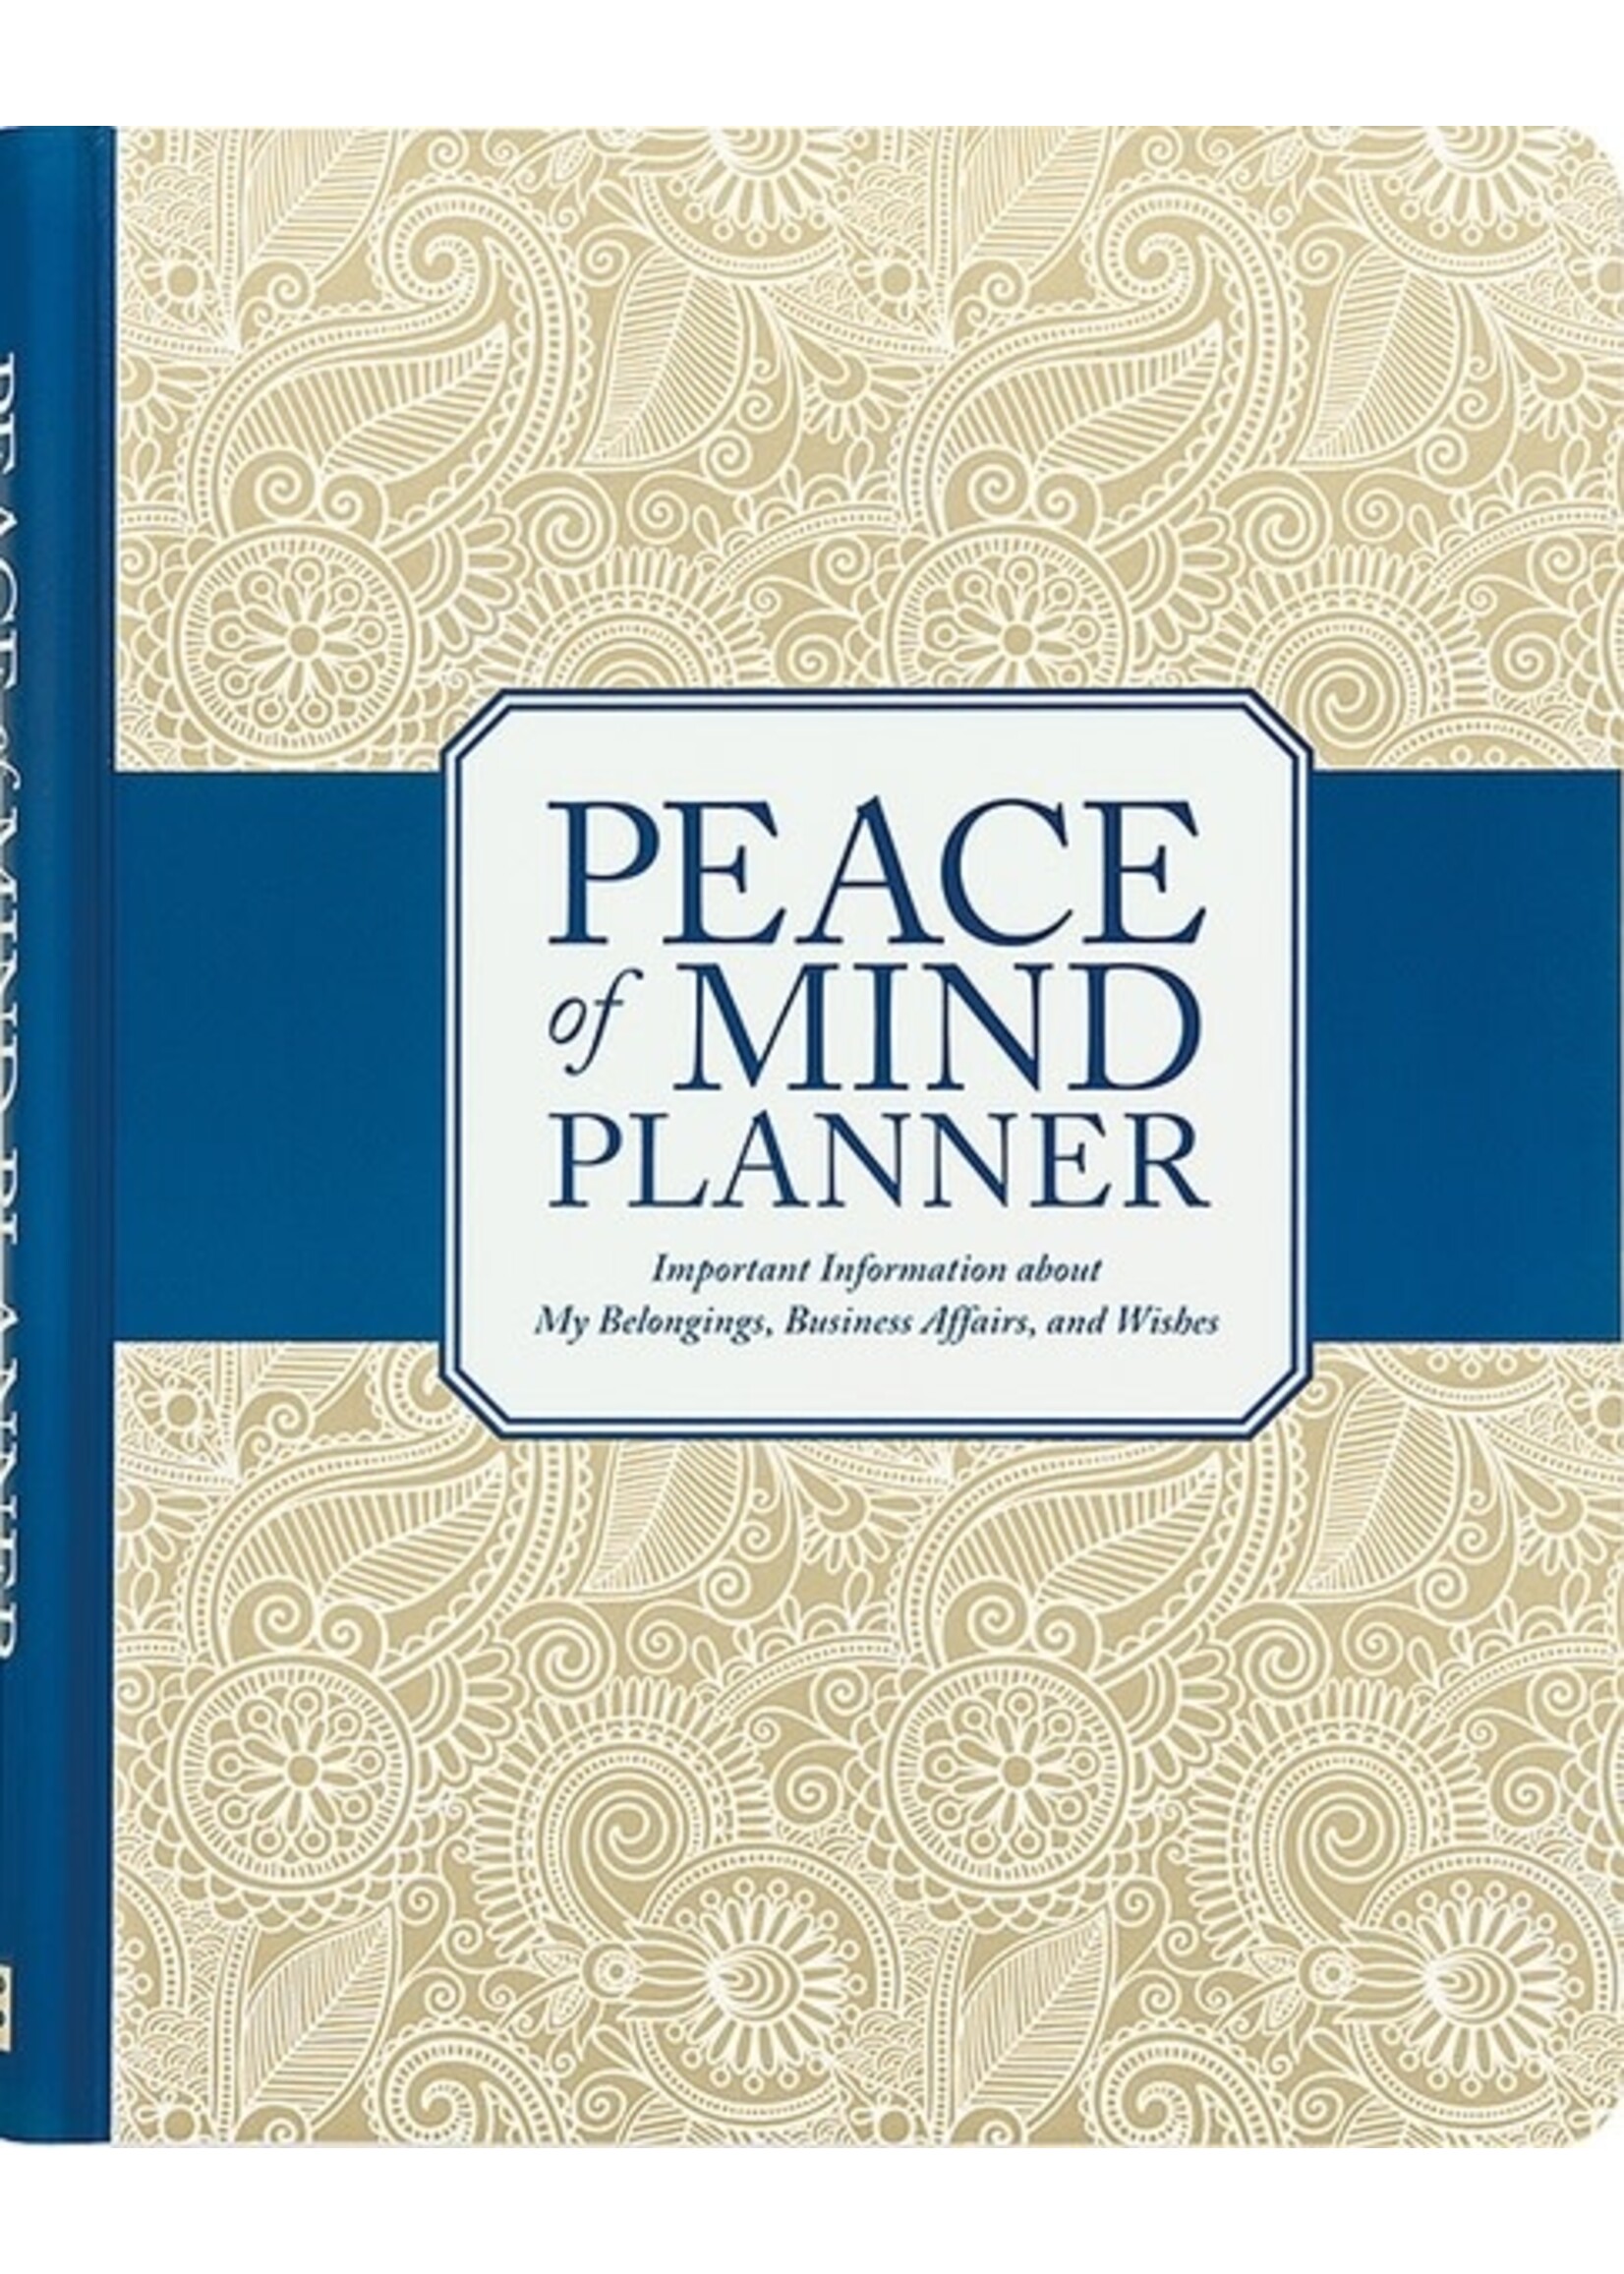 PPP PLANNER PEACE OF MIND